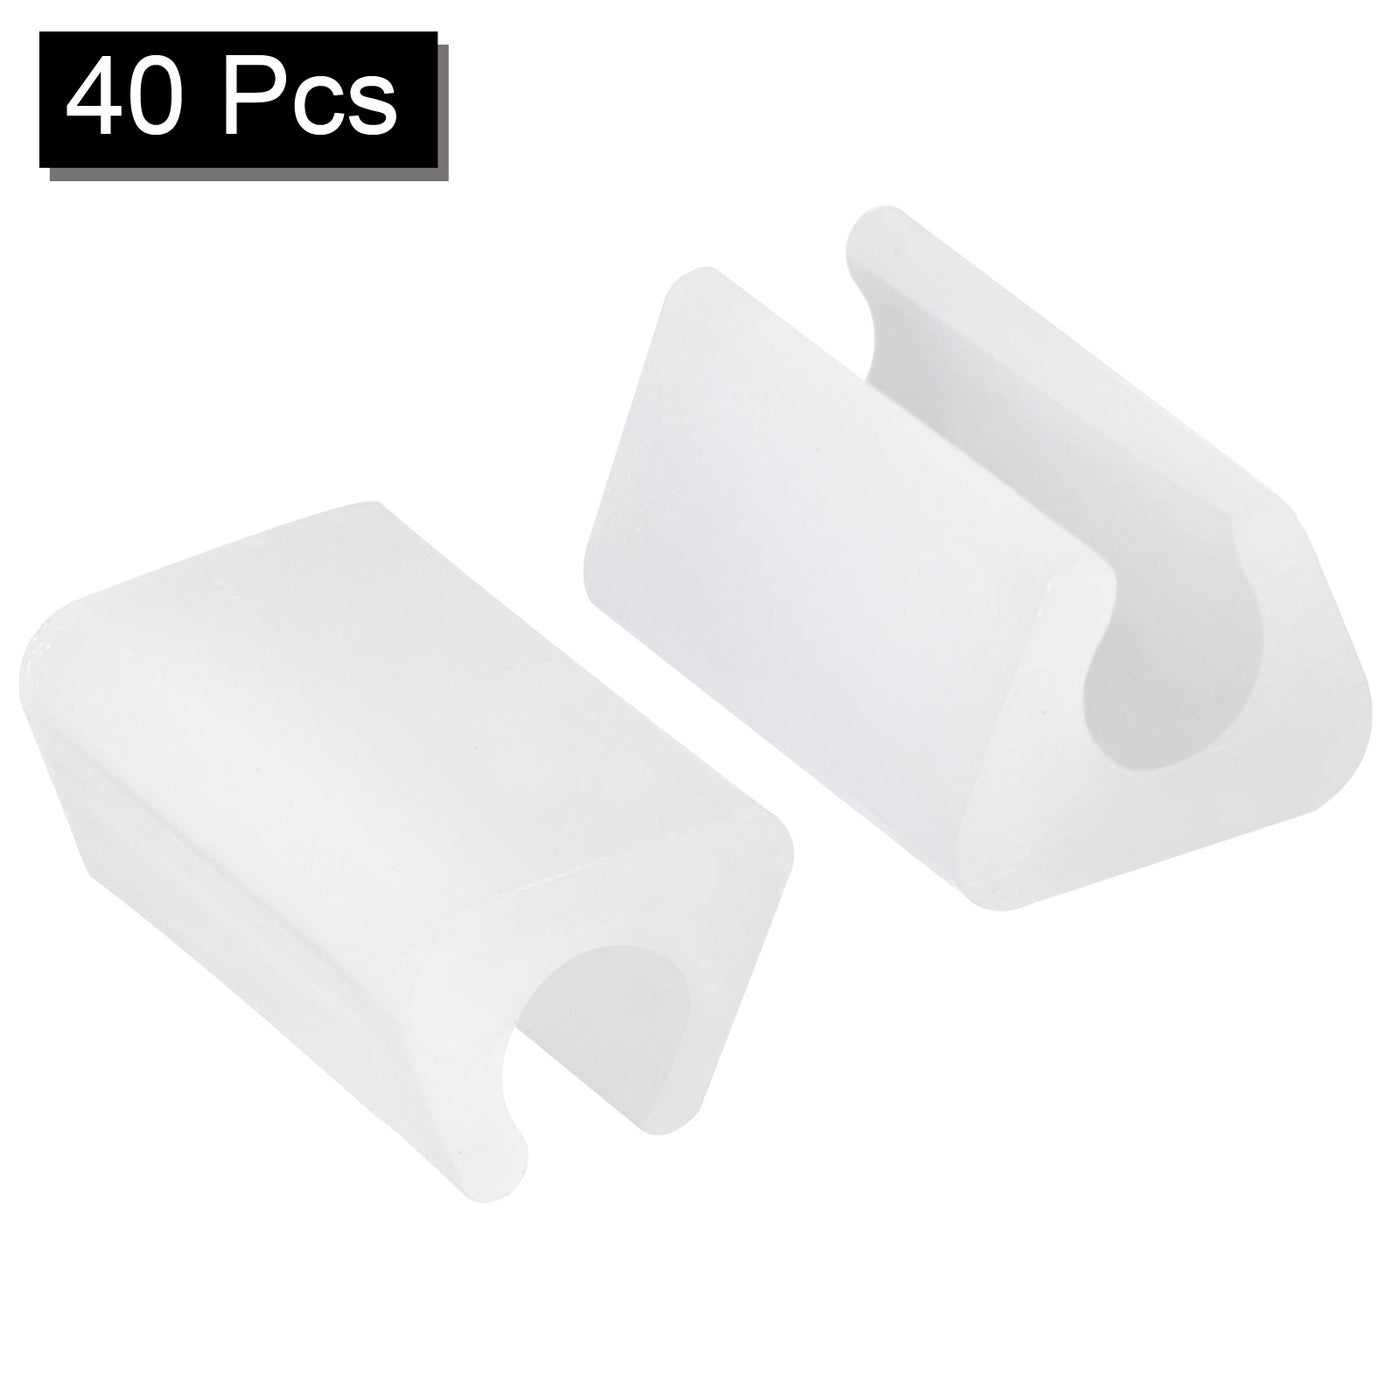 uxcell Uxcell 40Pcs Rectangle Shaped Non-Slip Chair Leg Tip 6-7mm Plastic Furniture Feet White